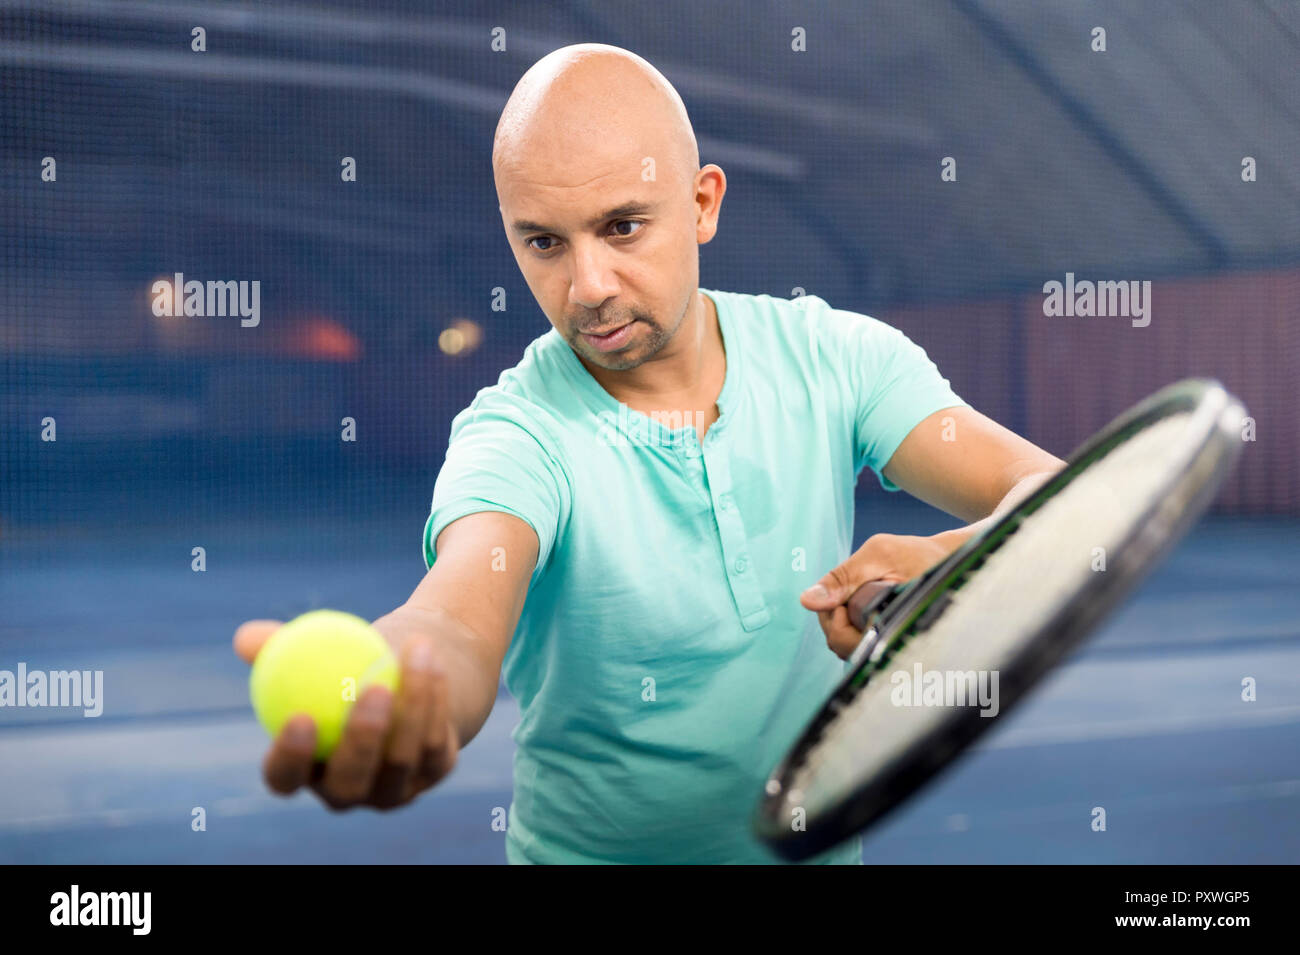 Tennis player holding ball for service Stock Photo